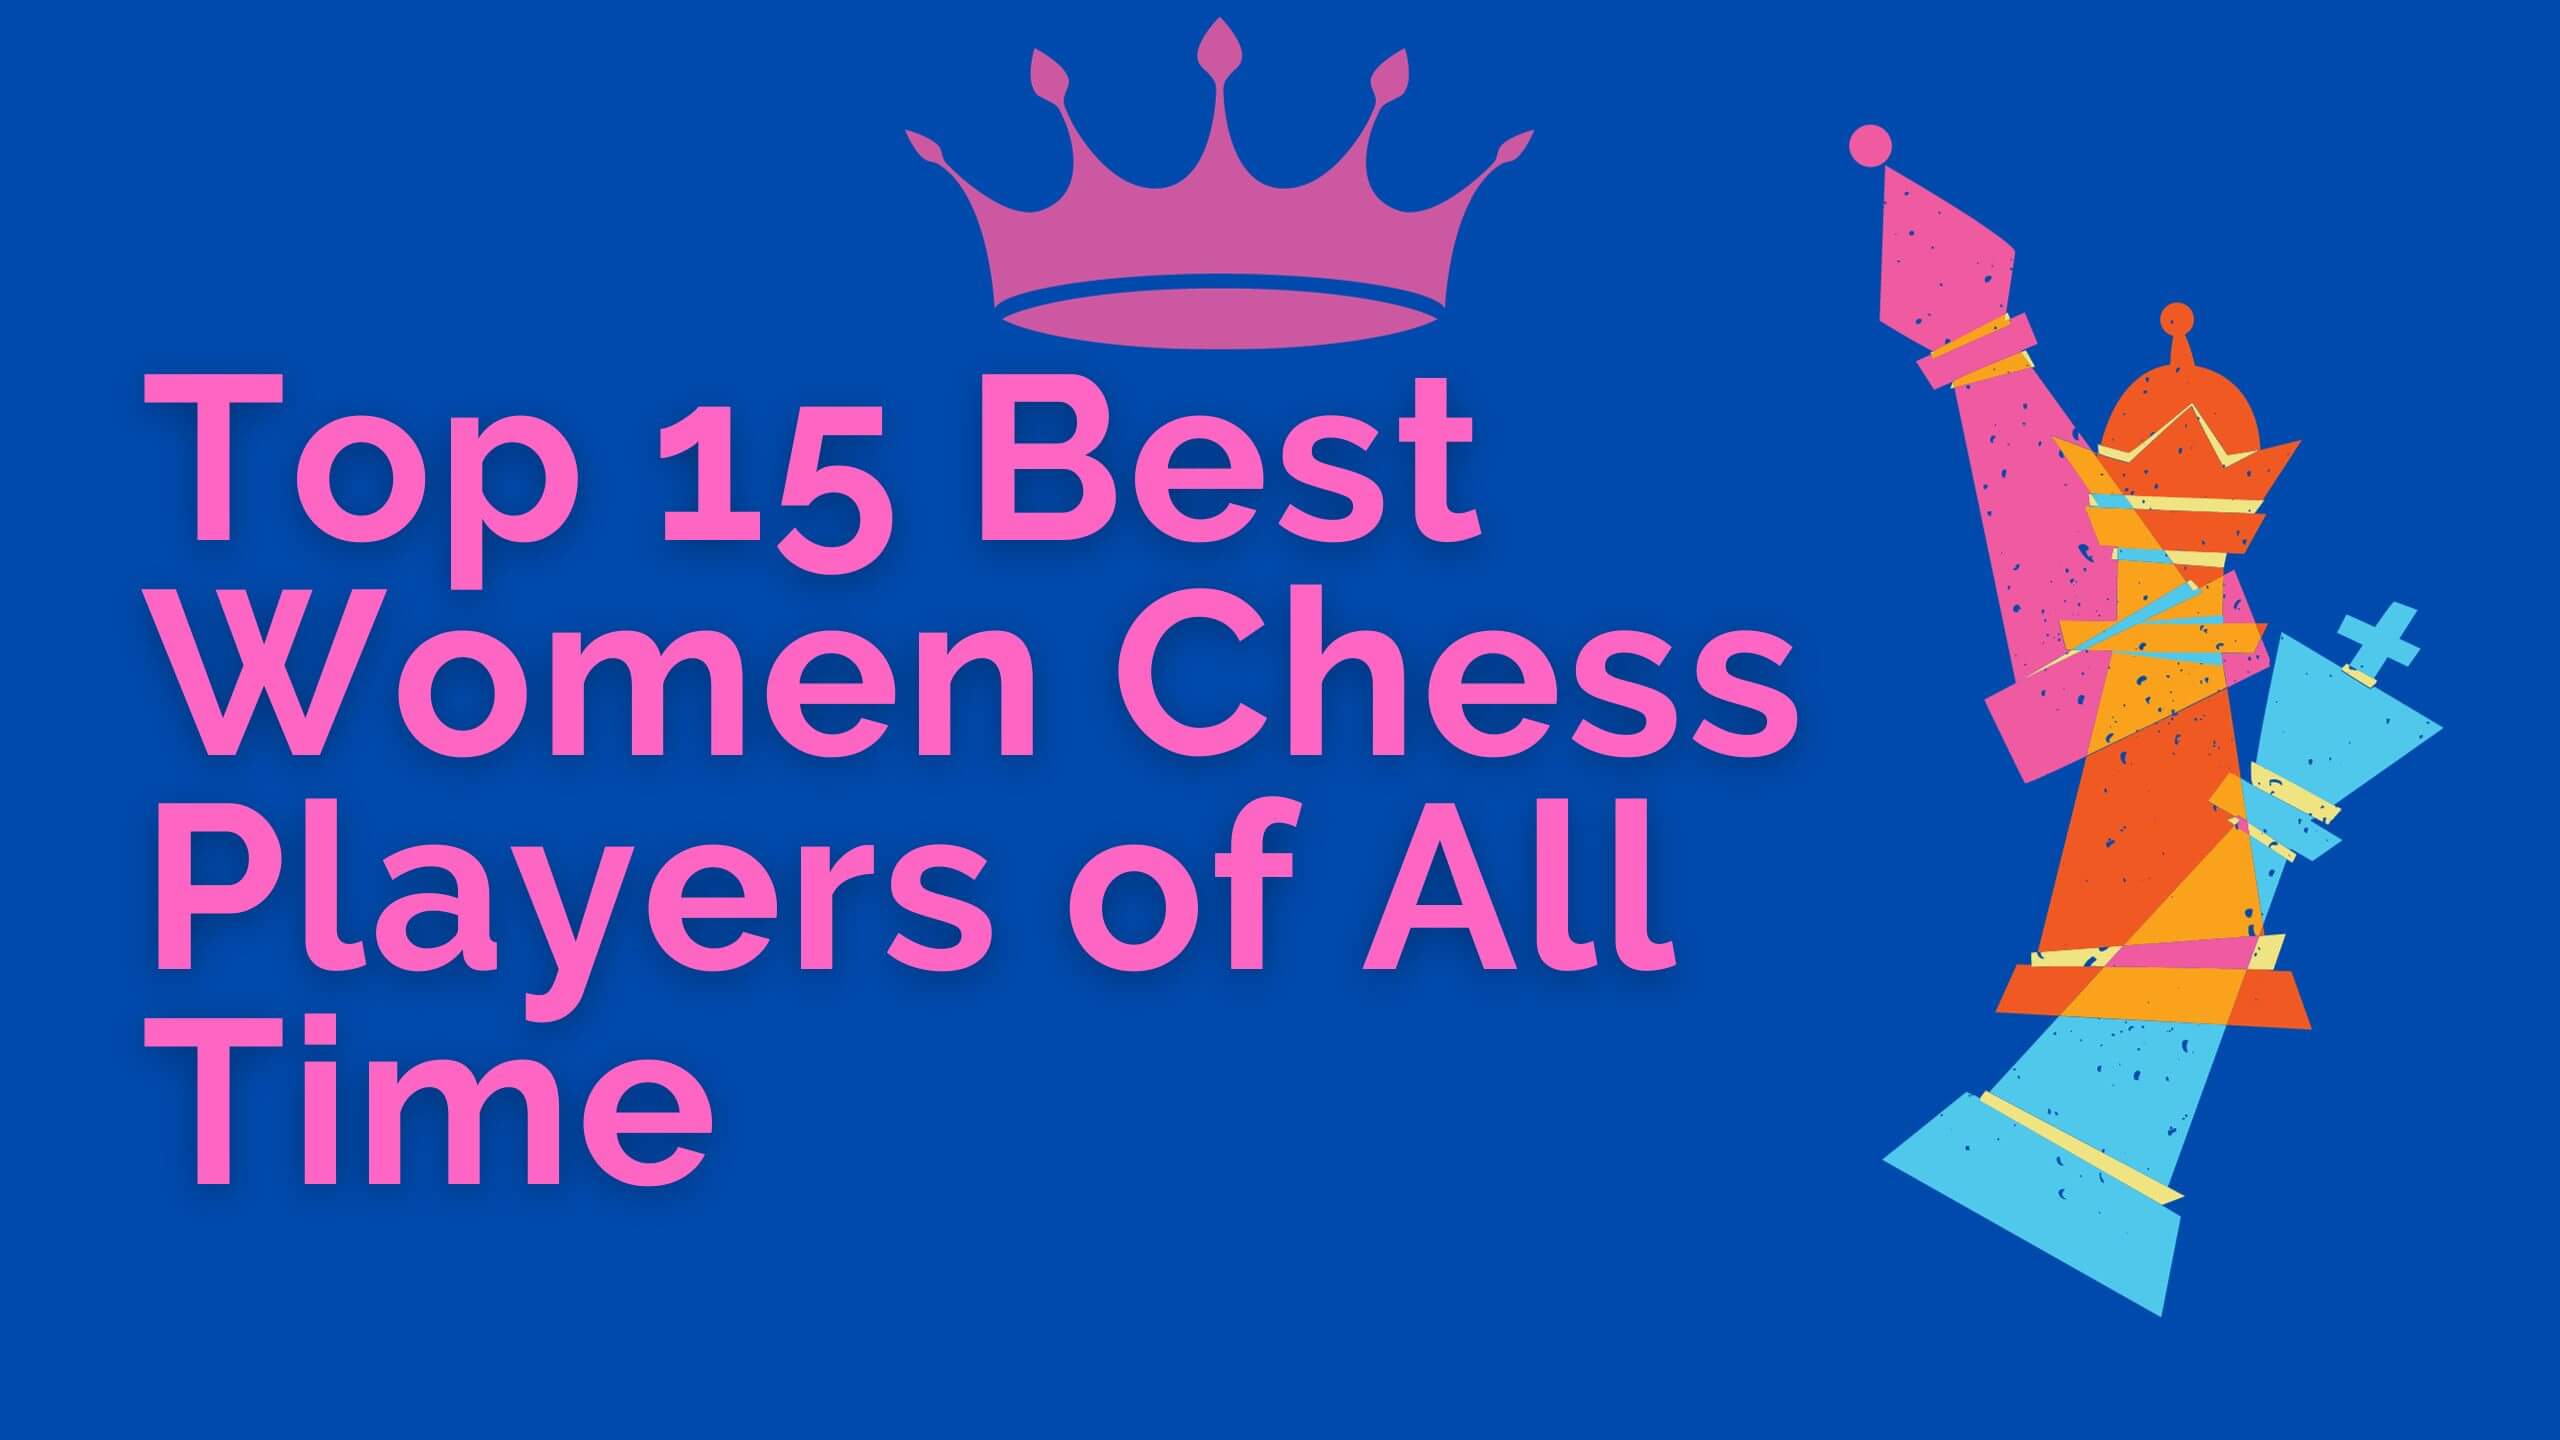 Top 15 Best Women Chess Players of All Time